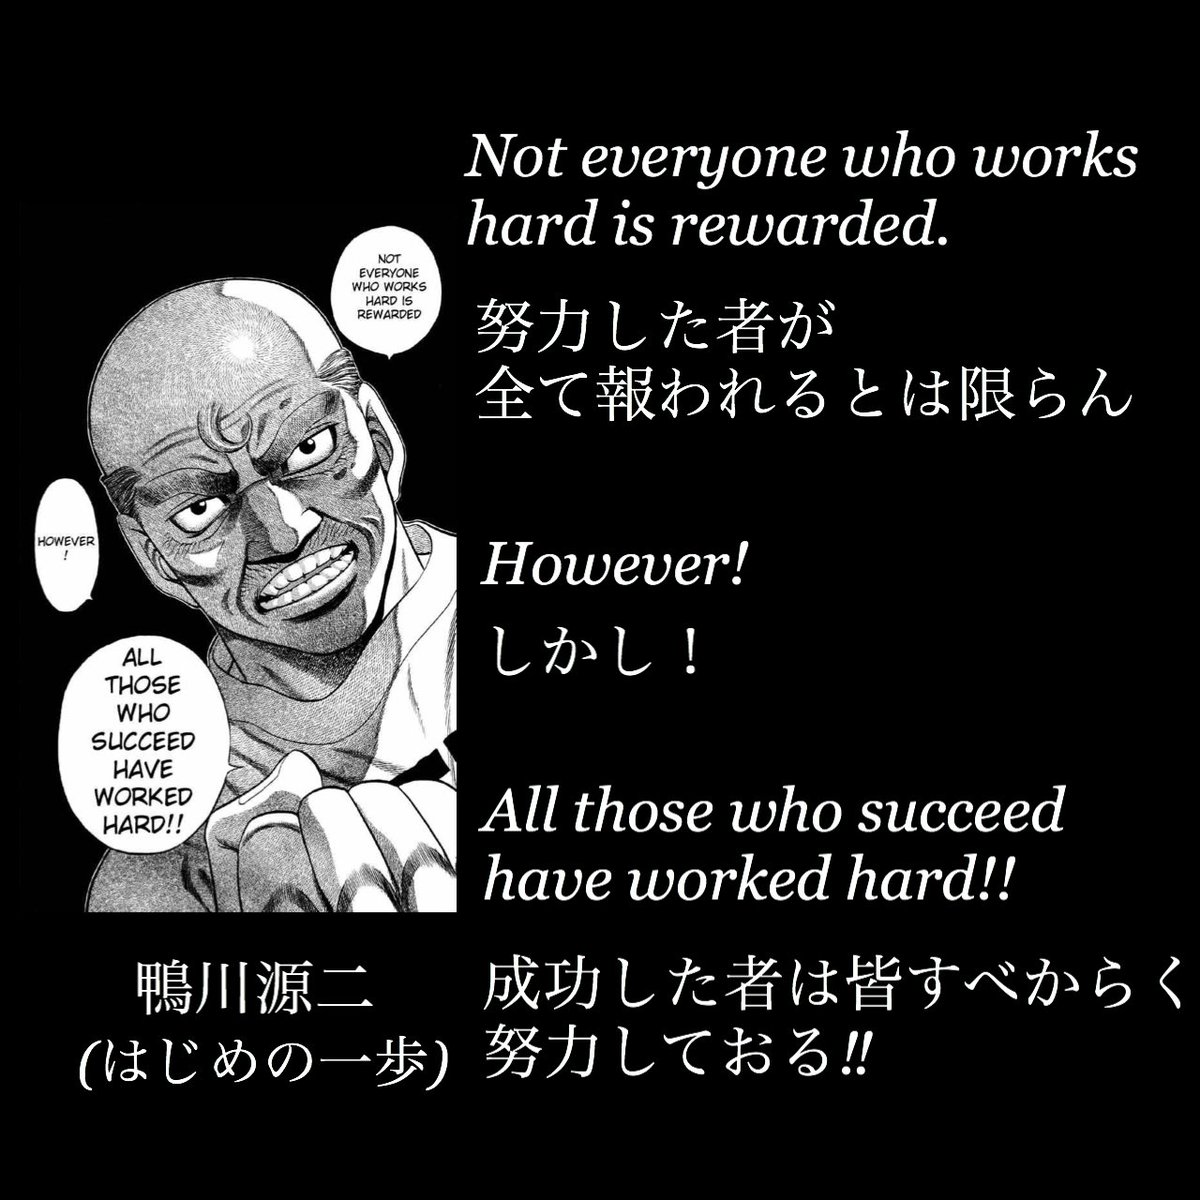 O Xrhsths マンガlines 英語 漫画 名言 Sto Twitter Not Everyone Who Works Hard Is Rewarded 努力した者が全て報われるとは限らん However しかし All Those Who Succeed Have Worked Hard 成功した者は皆すべからく努力しておる 鴨川源二 鴨川会長